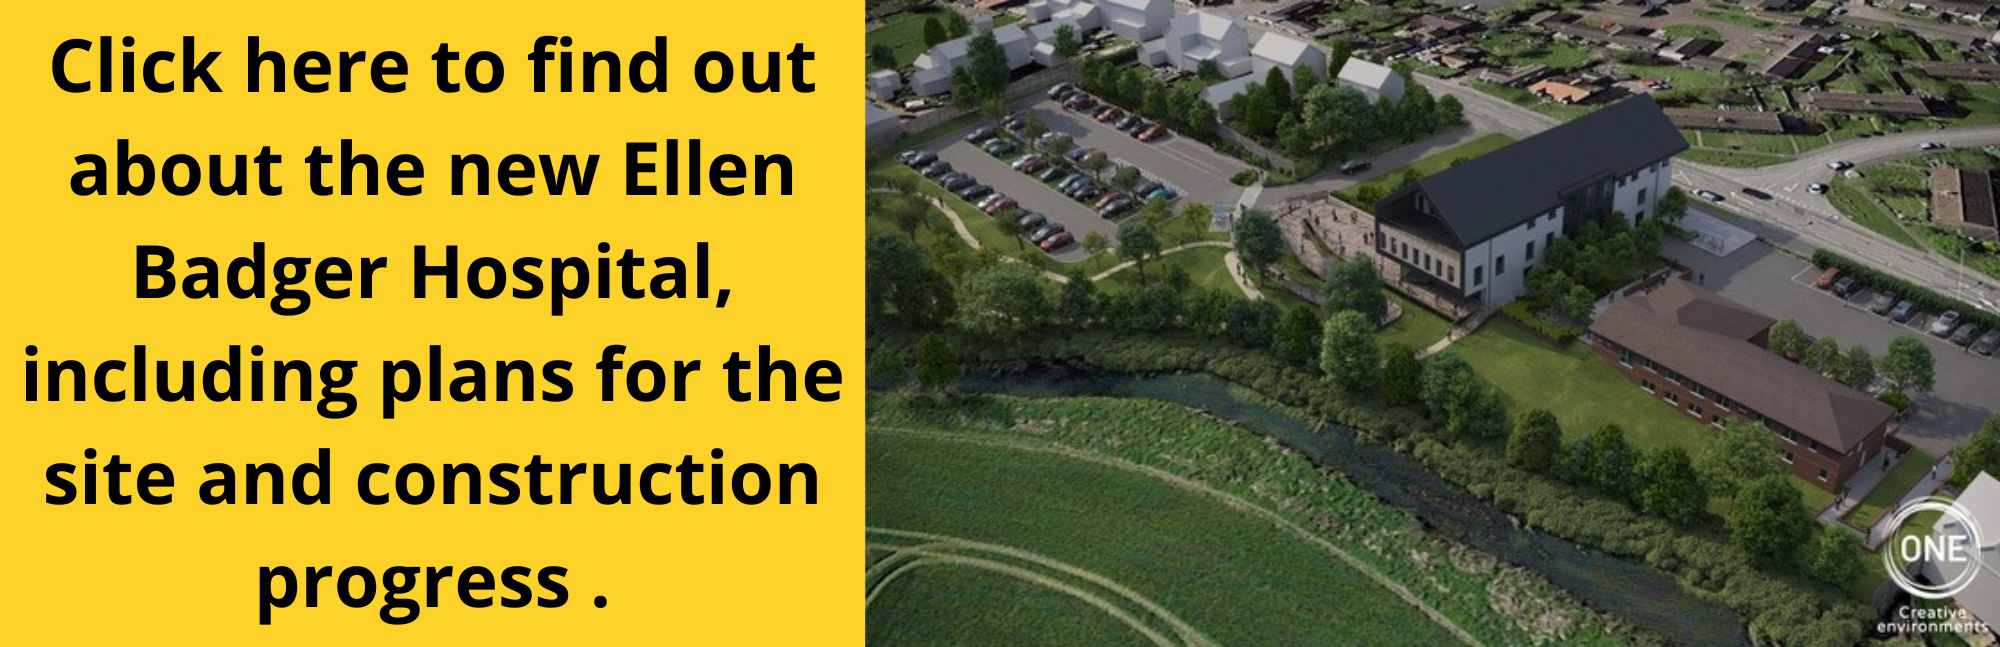 Click_here_to_find_out_about_the_new_Ellen_Badger_Hospital_including_plans_for_the_site_and_construction_progress.jpg